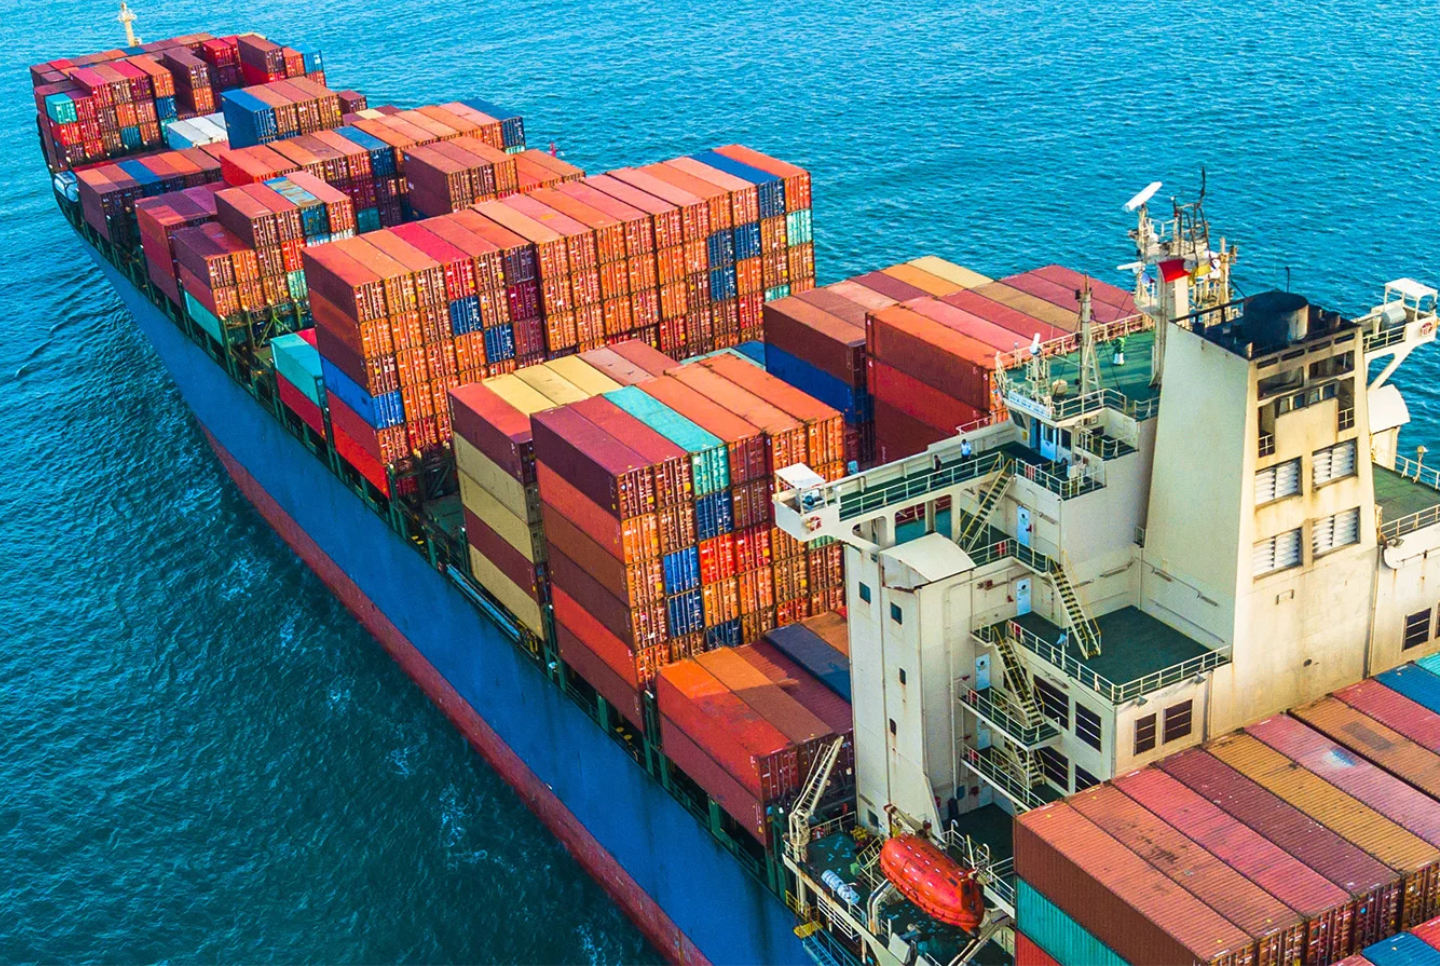 Read about our pre-built connections that make connecting with customers or forwarders simple and easy to maintain for shippers around the world.